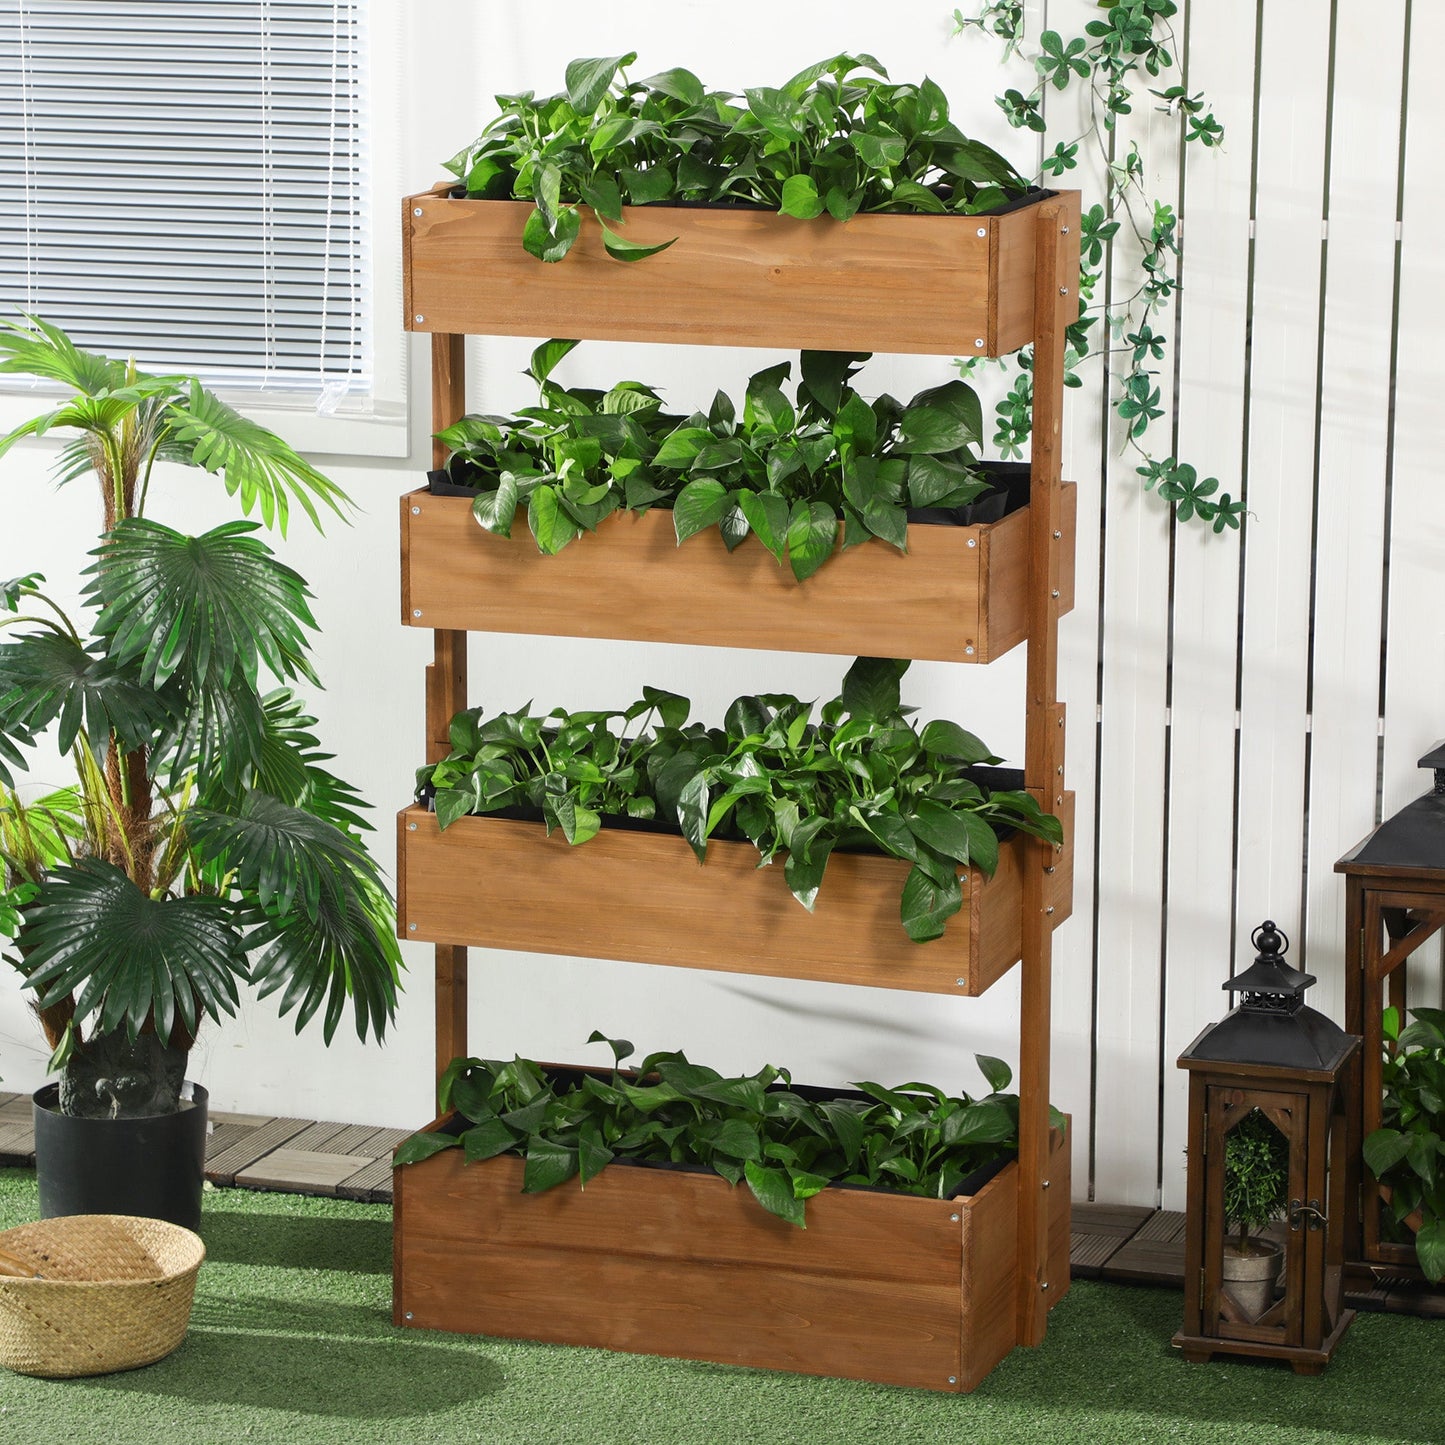 4-Tier Raised Garden Bed, Vertical Elevated Planter Rack with Non-woven Fabric, Wooden Raised Planter Boxes for Indoor and Outdoor at Gallery Canada